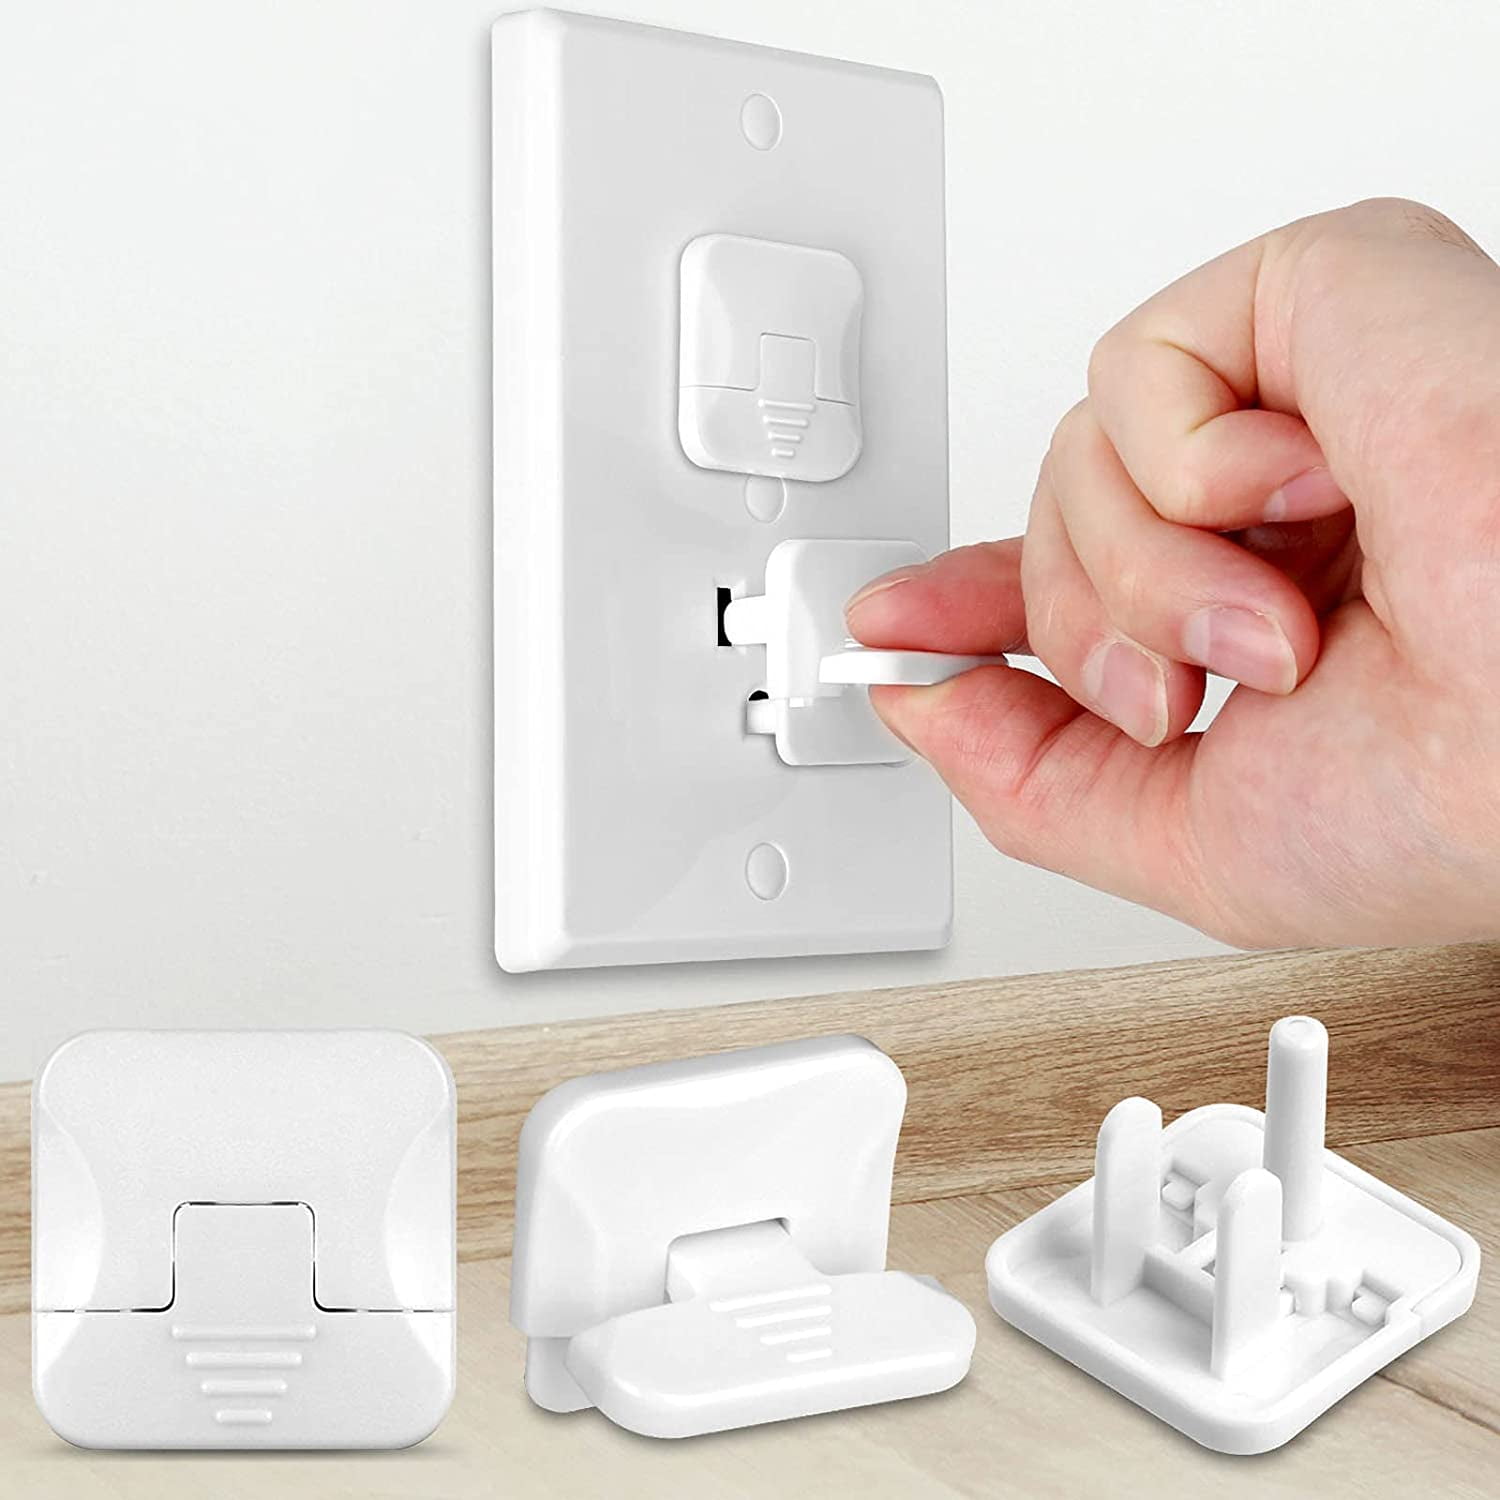 12 Plug Socket Covers Baby Children's Safety Protector UK 3 Pin Child Proof 